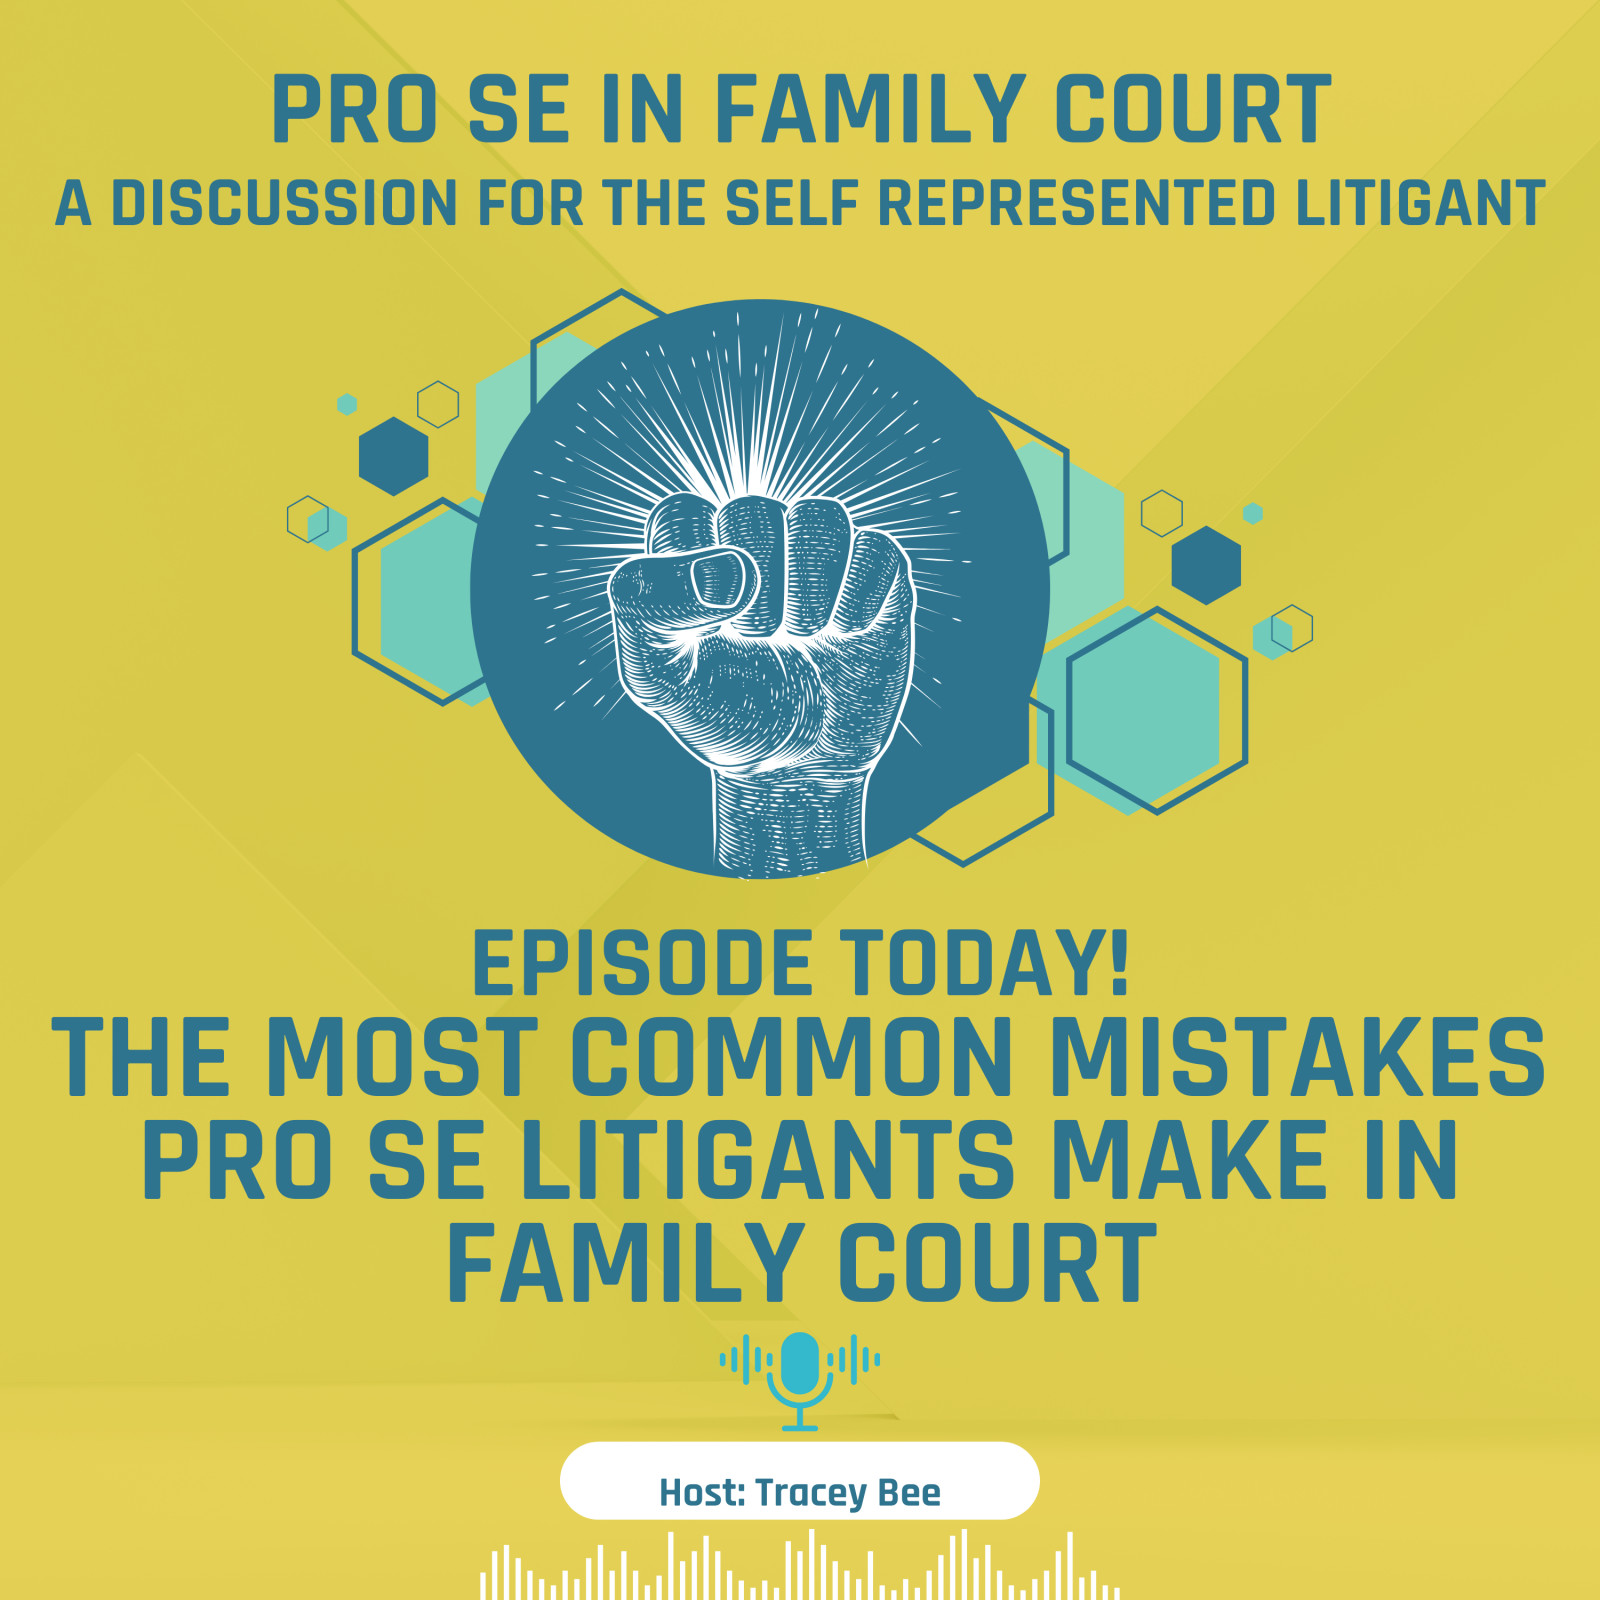 Episode 7: The Most Common Mistakes Pro Se Litigants Make in Family Court